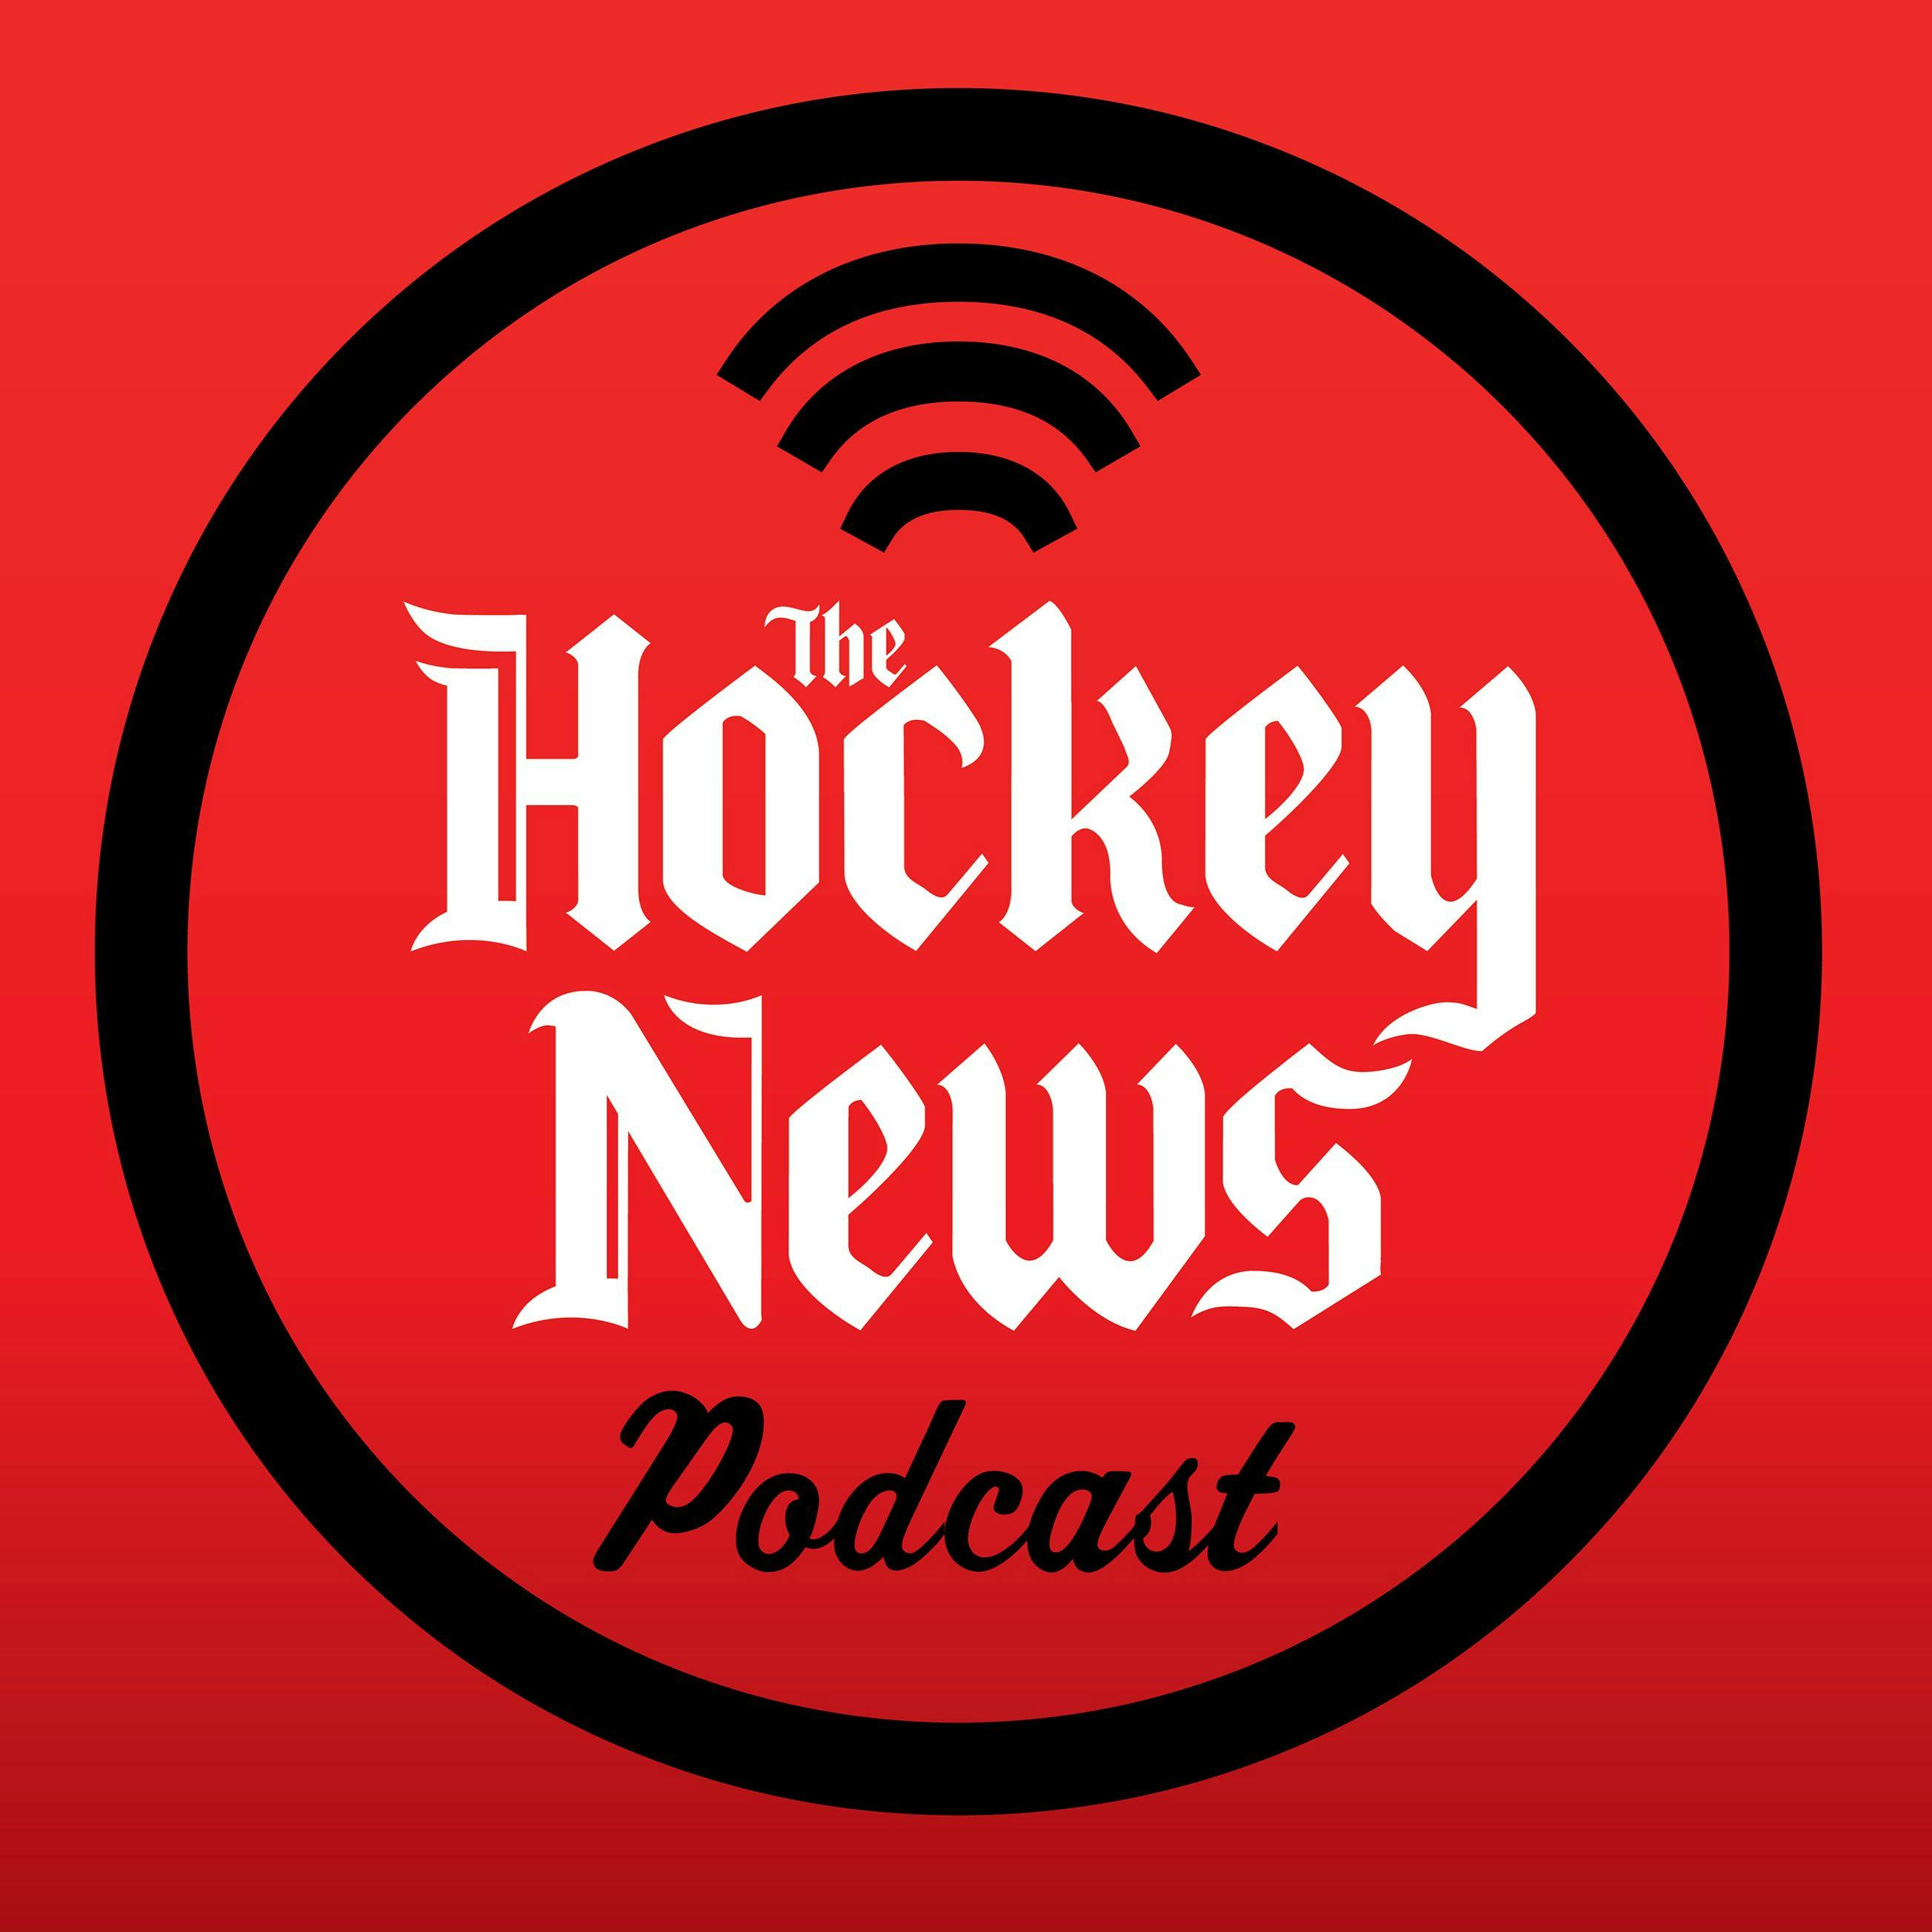 The Hockey News Podcast: How About Those Canucks?